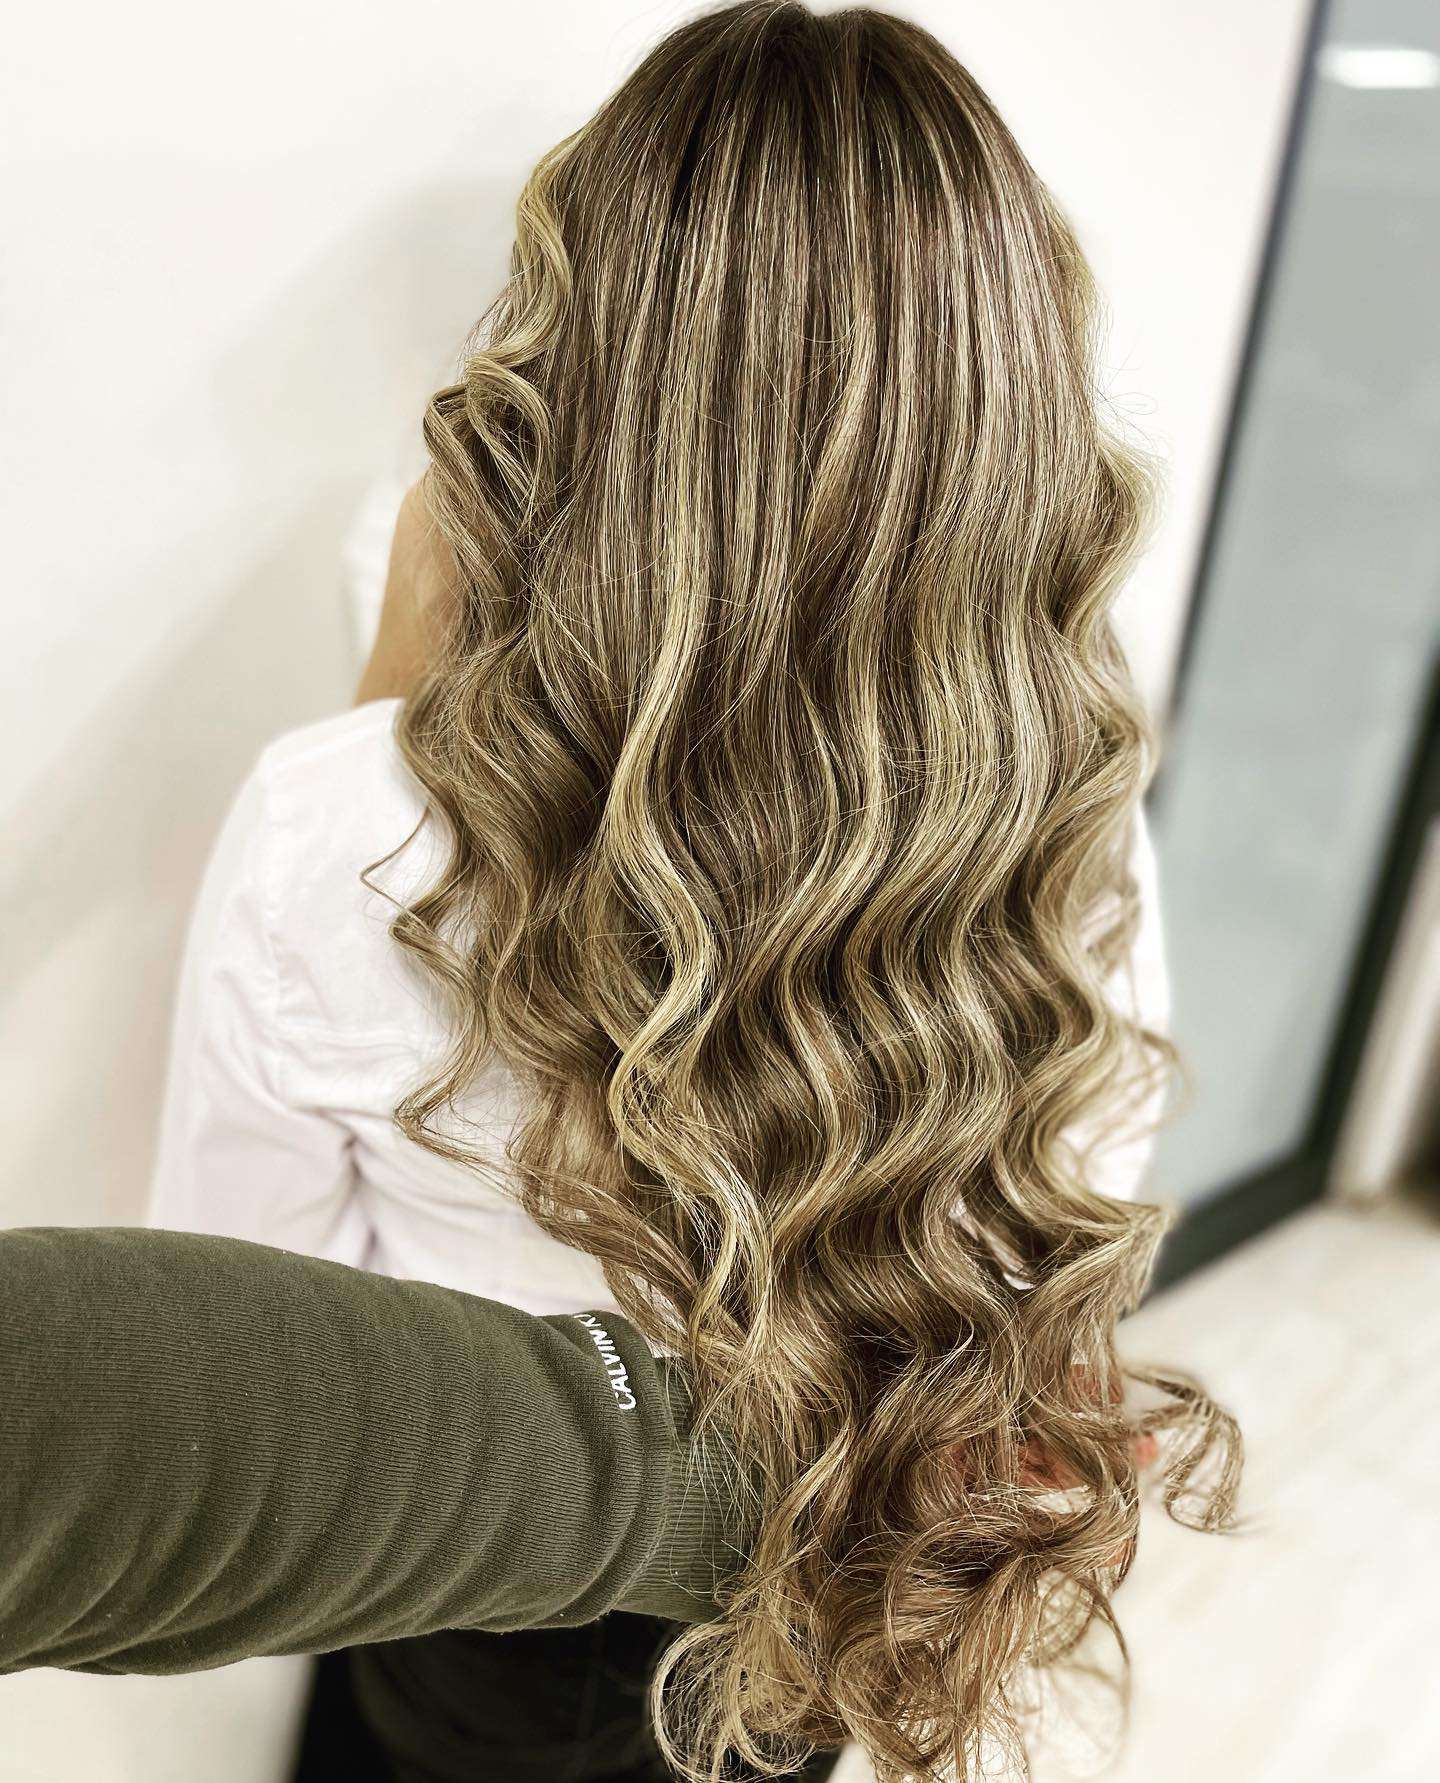 30+ Long Hairstyles And Haircuts For Long Hair To Try In 2022 images 22